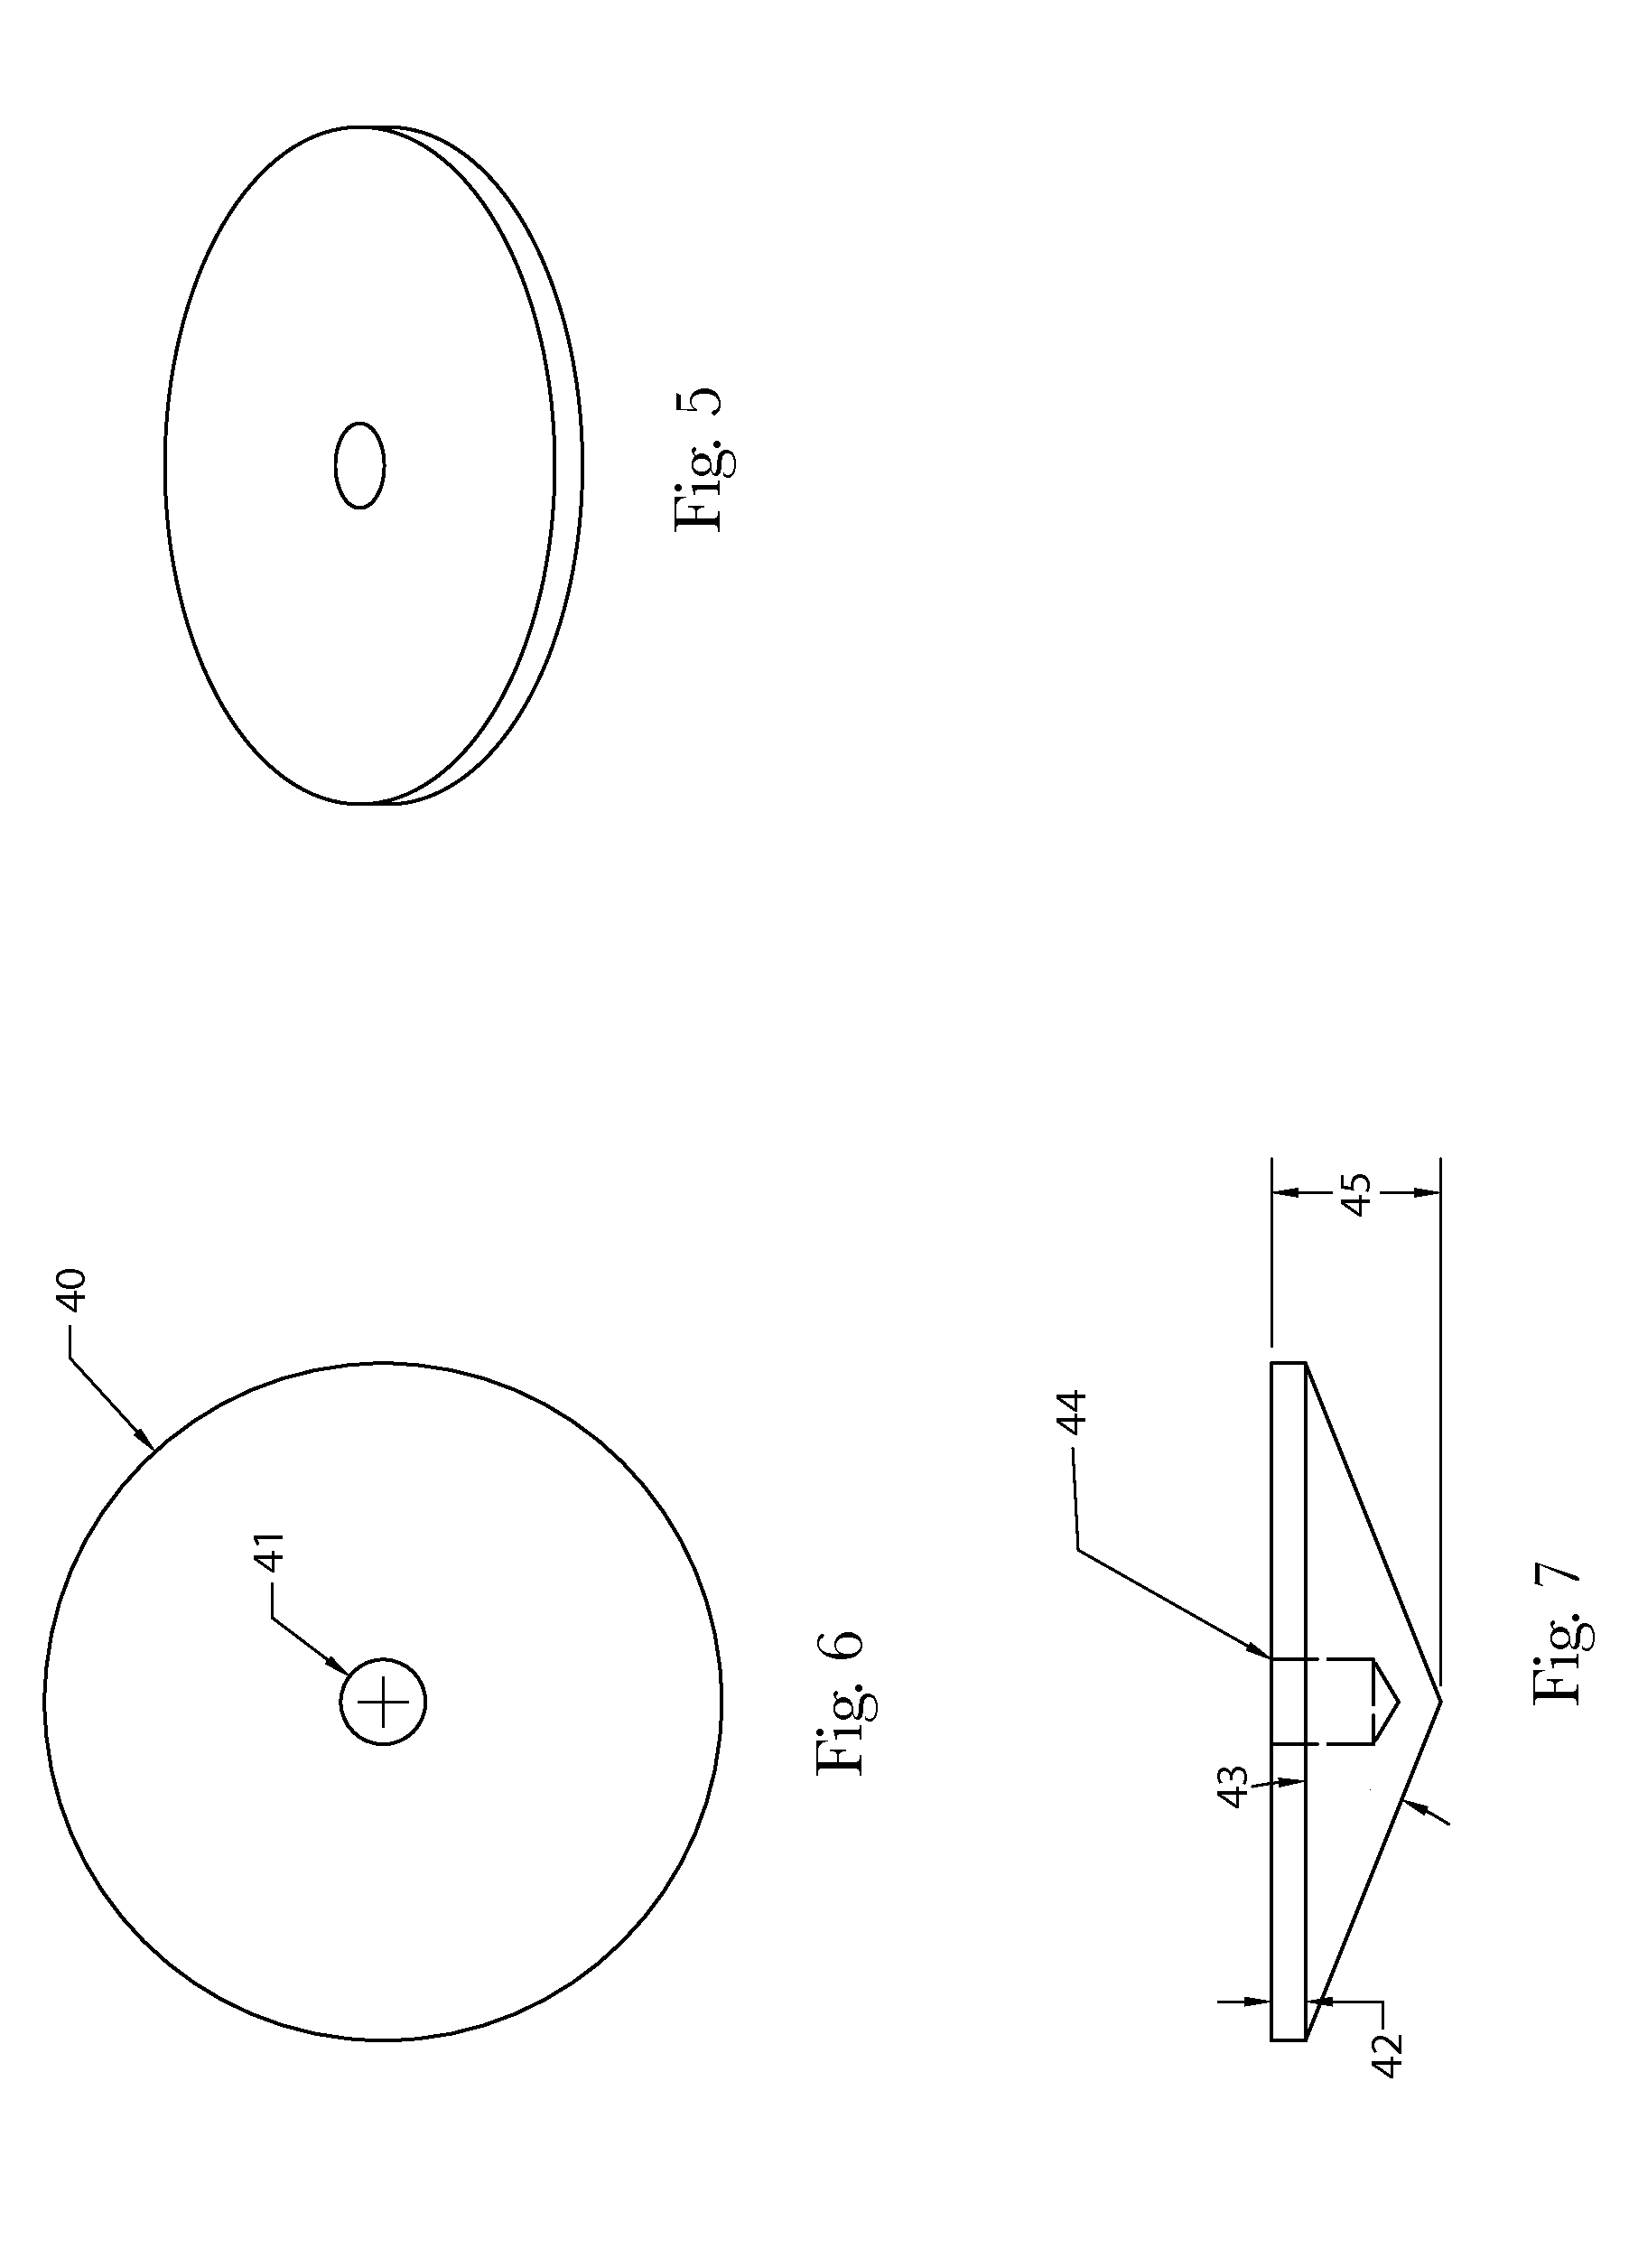 Denture adhesive compositions and methods